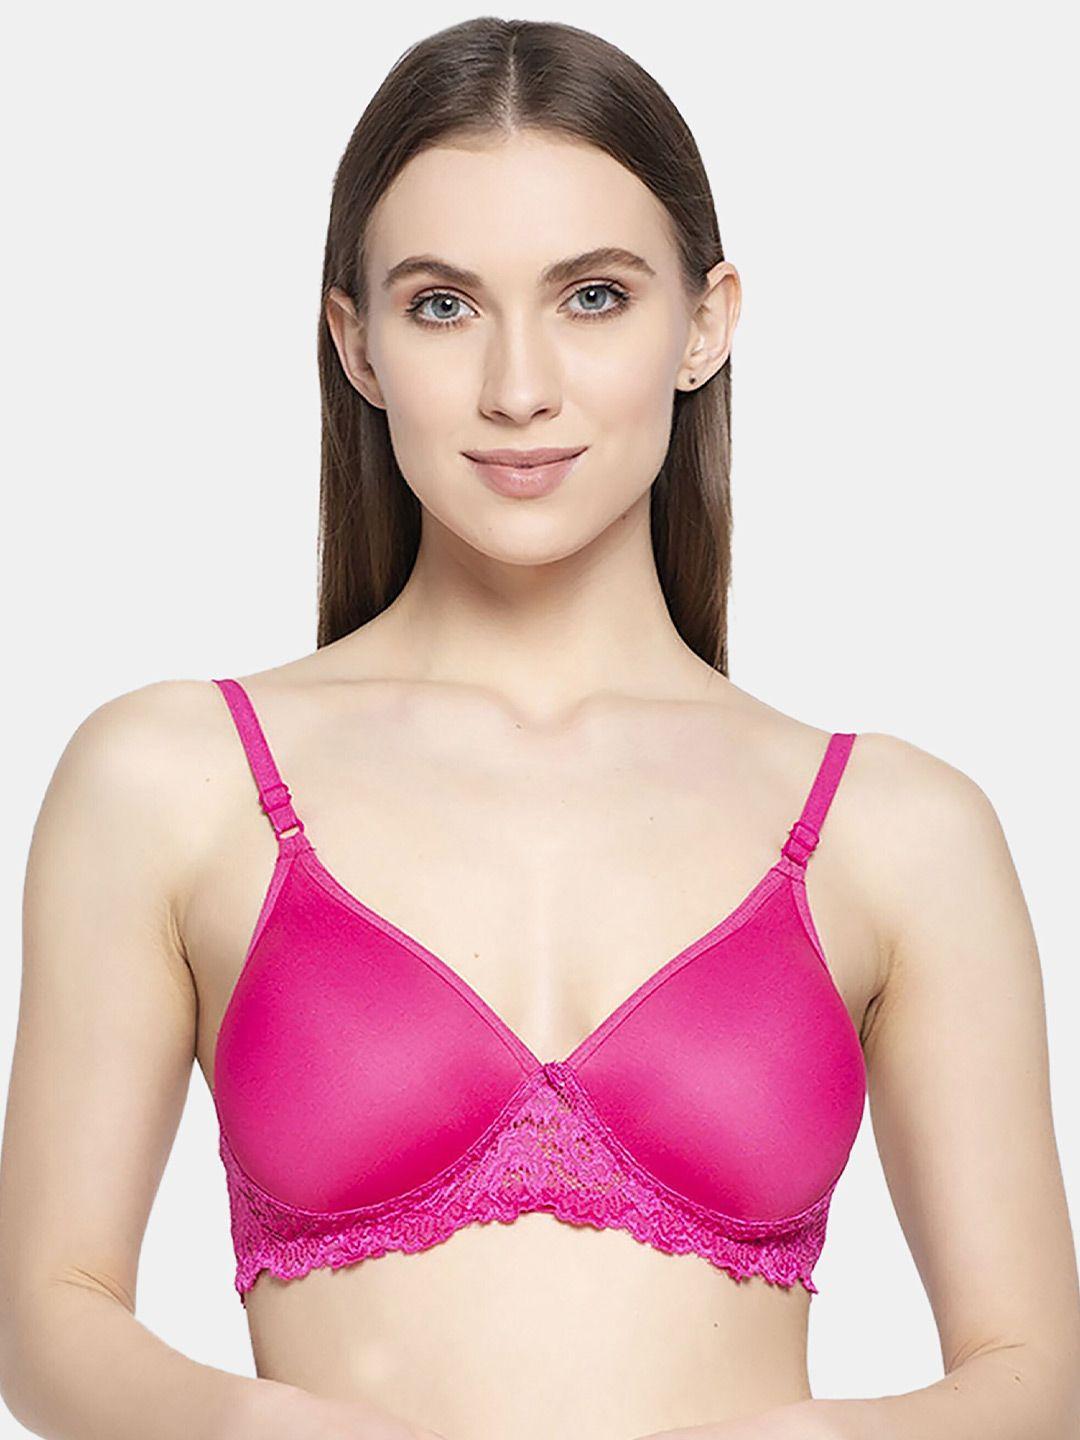 arousy floral lace seamless non-padded full coverage organic cotton bra